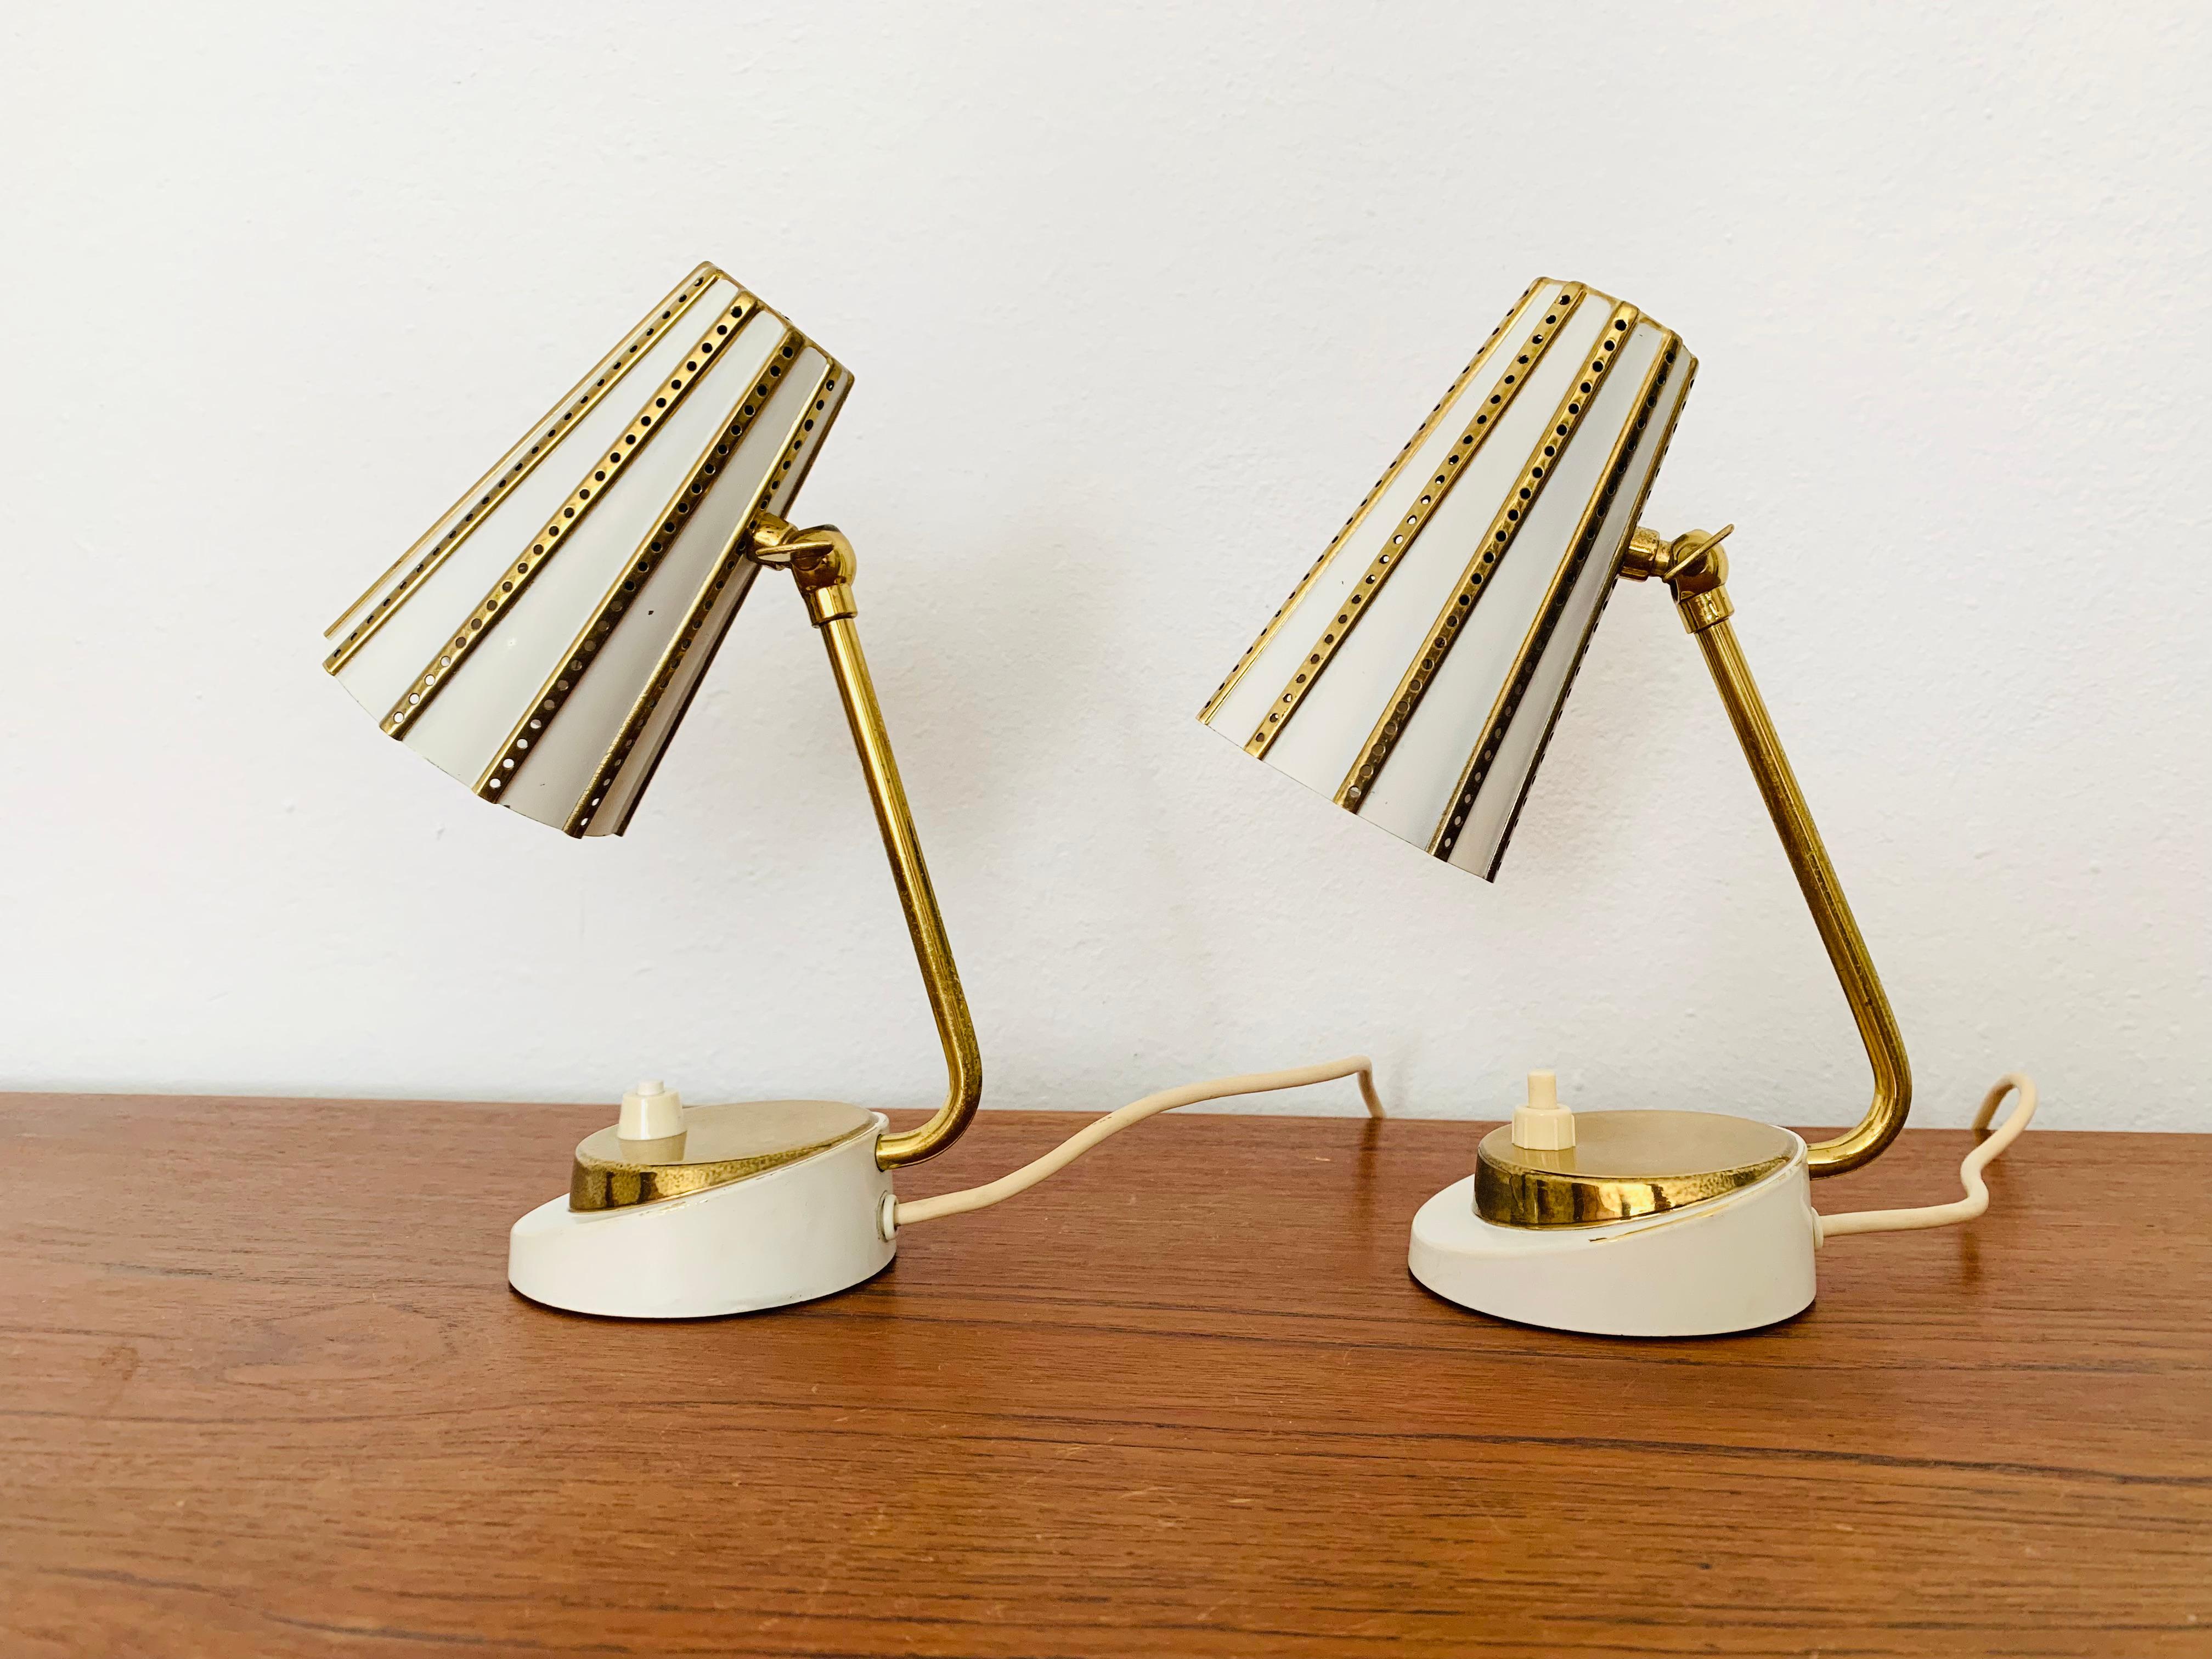 Charming table lamps from the 1950s.
The decorative lampshade spreads a great glamorous and sparkling light.
An absolute eye-catcher in every home.

Condition:

Very good vintage condition with slight signs of wear consistent with